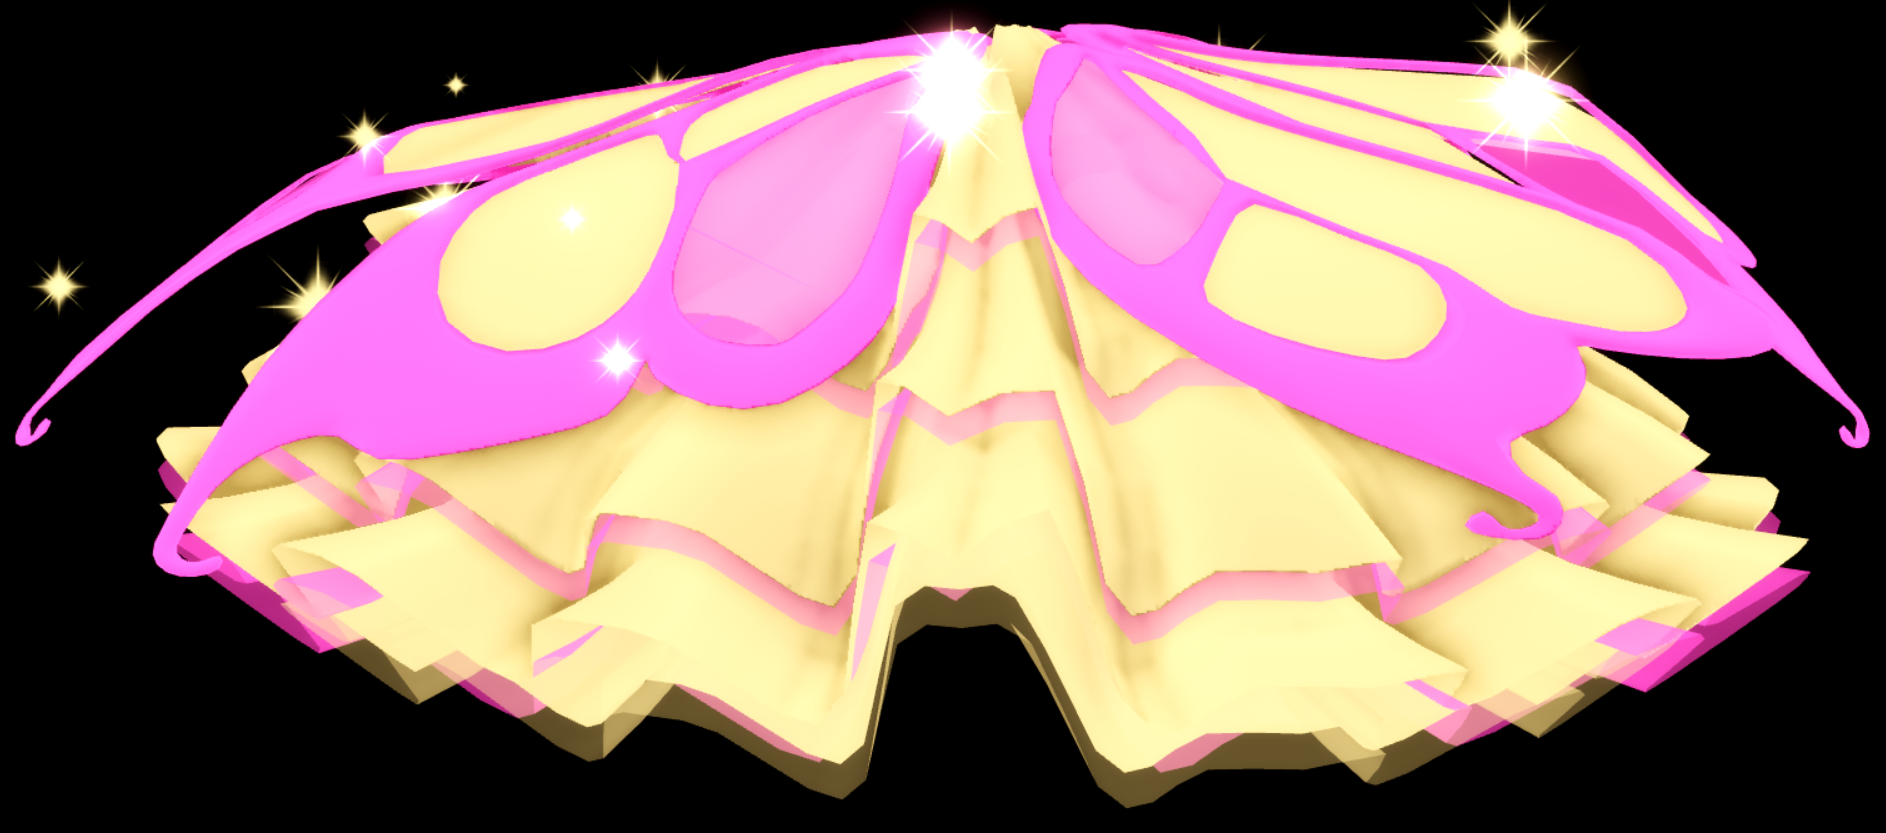 Fluttering Butterfly Skirt Royale High Wiki Fandom - butterfly outfit roblox royale high